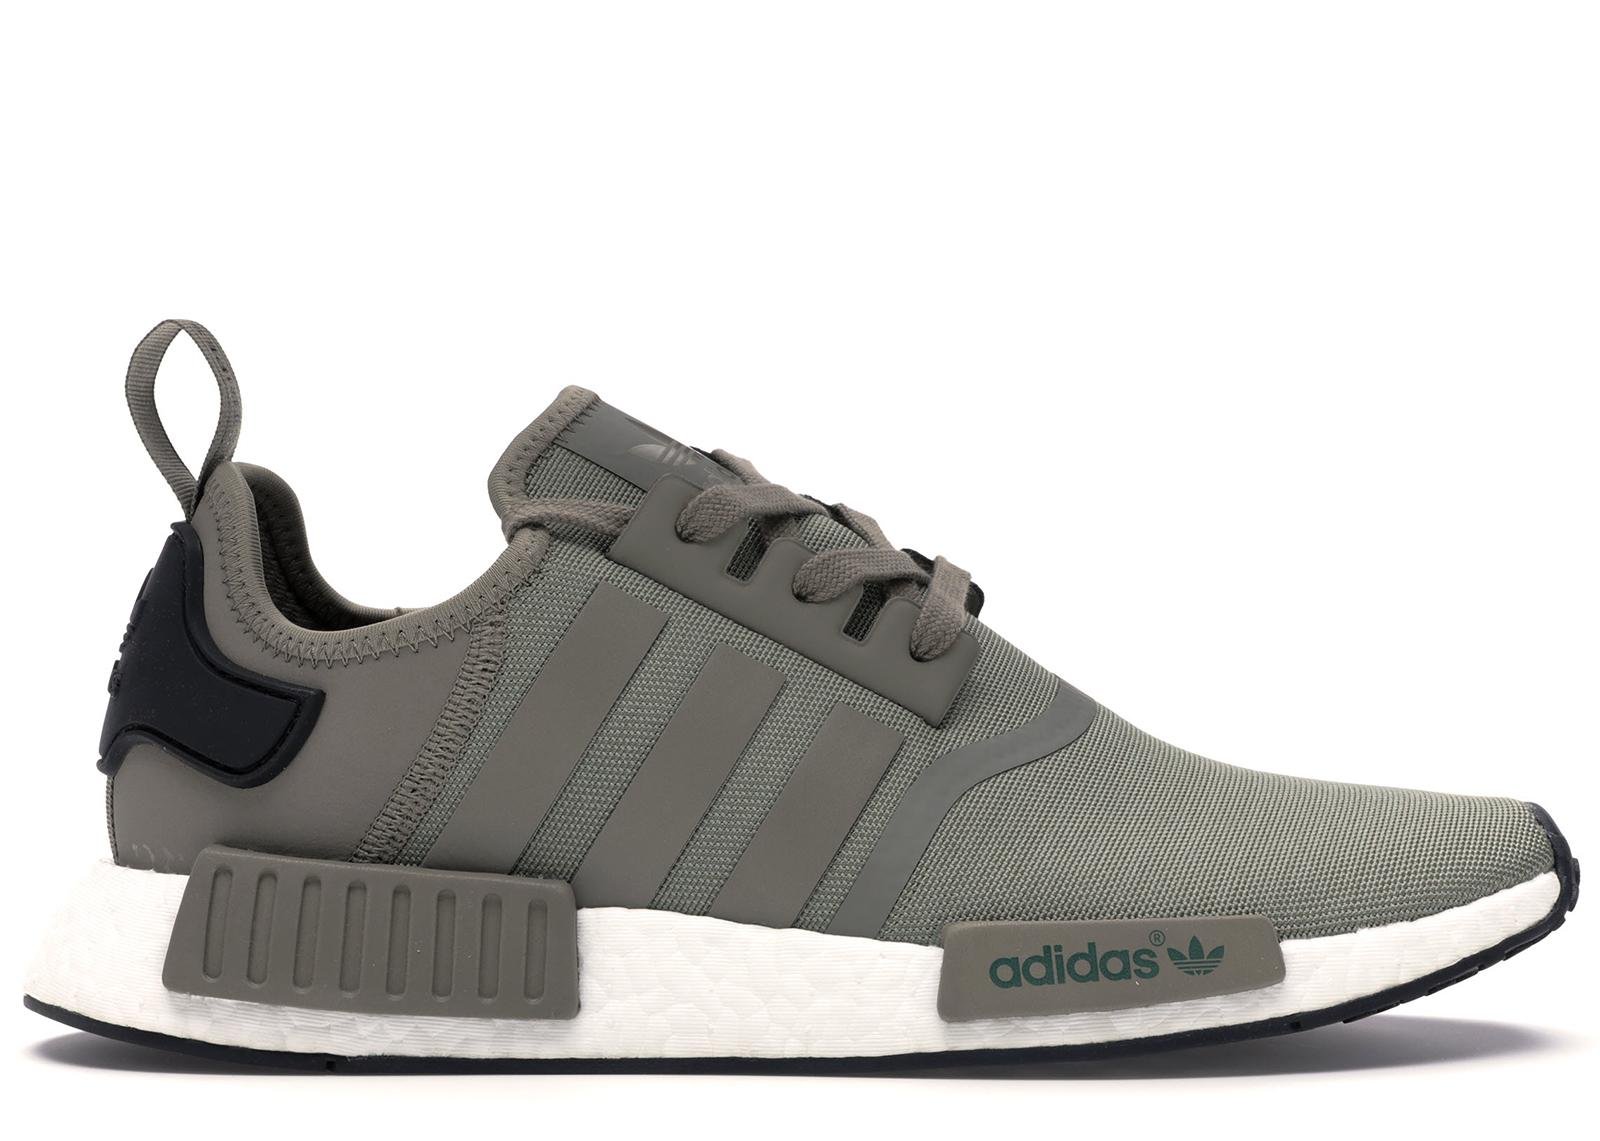 adidas Nmd R1 Trace Cargo in Black for 